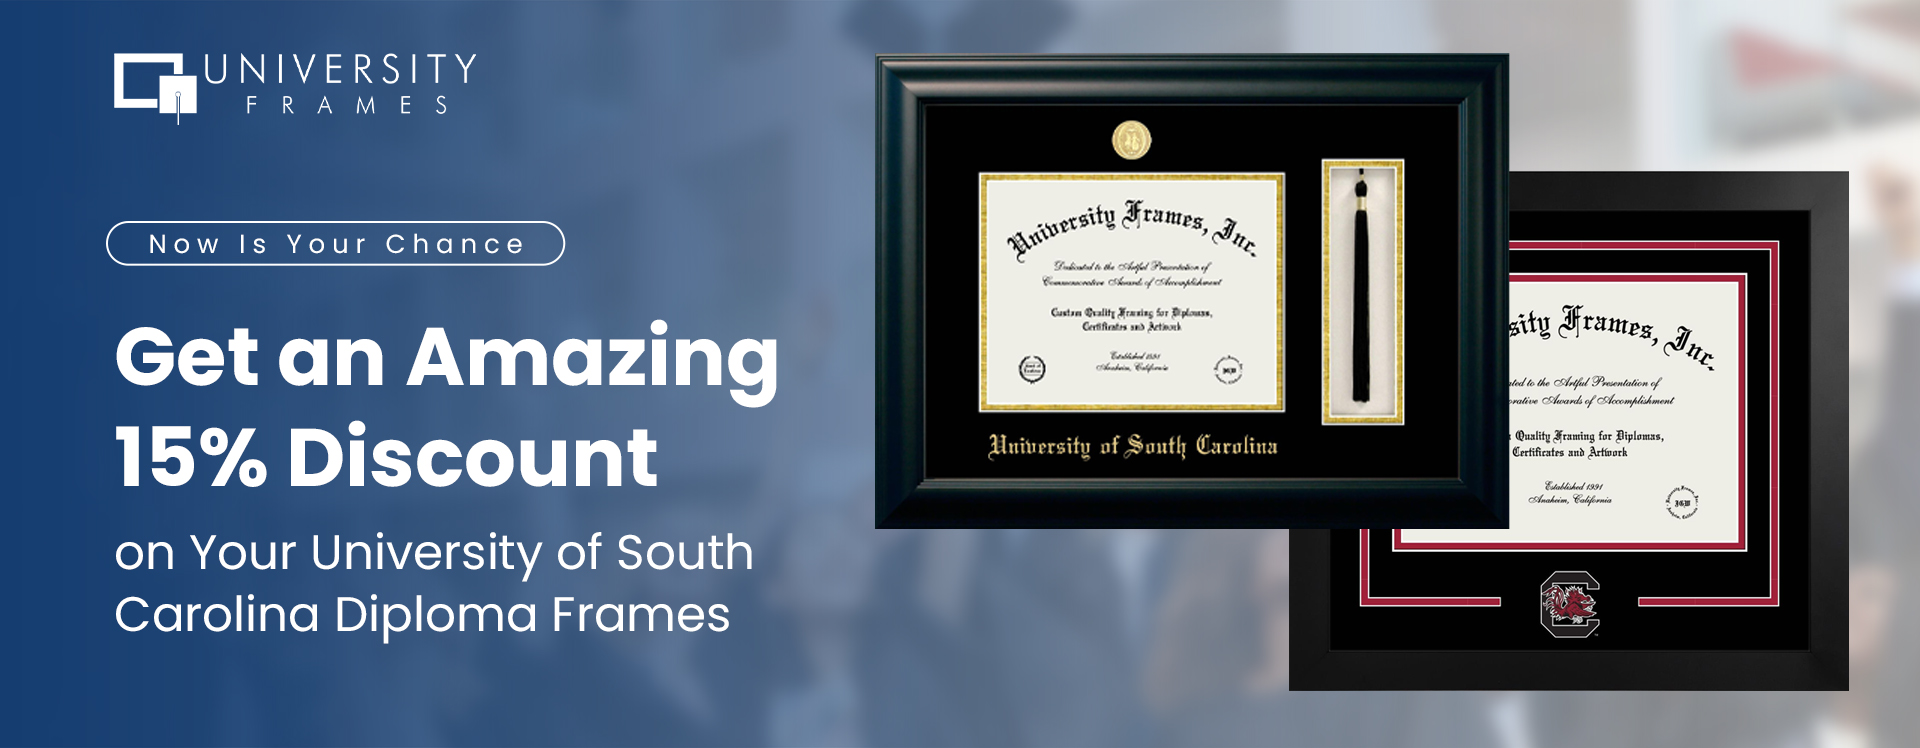 Now Is Your Chance to Get an Amazing 15% Discount on Your University of South Carolina Diploma Frames 